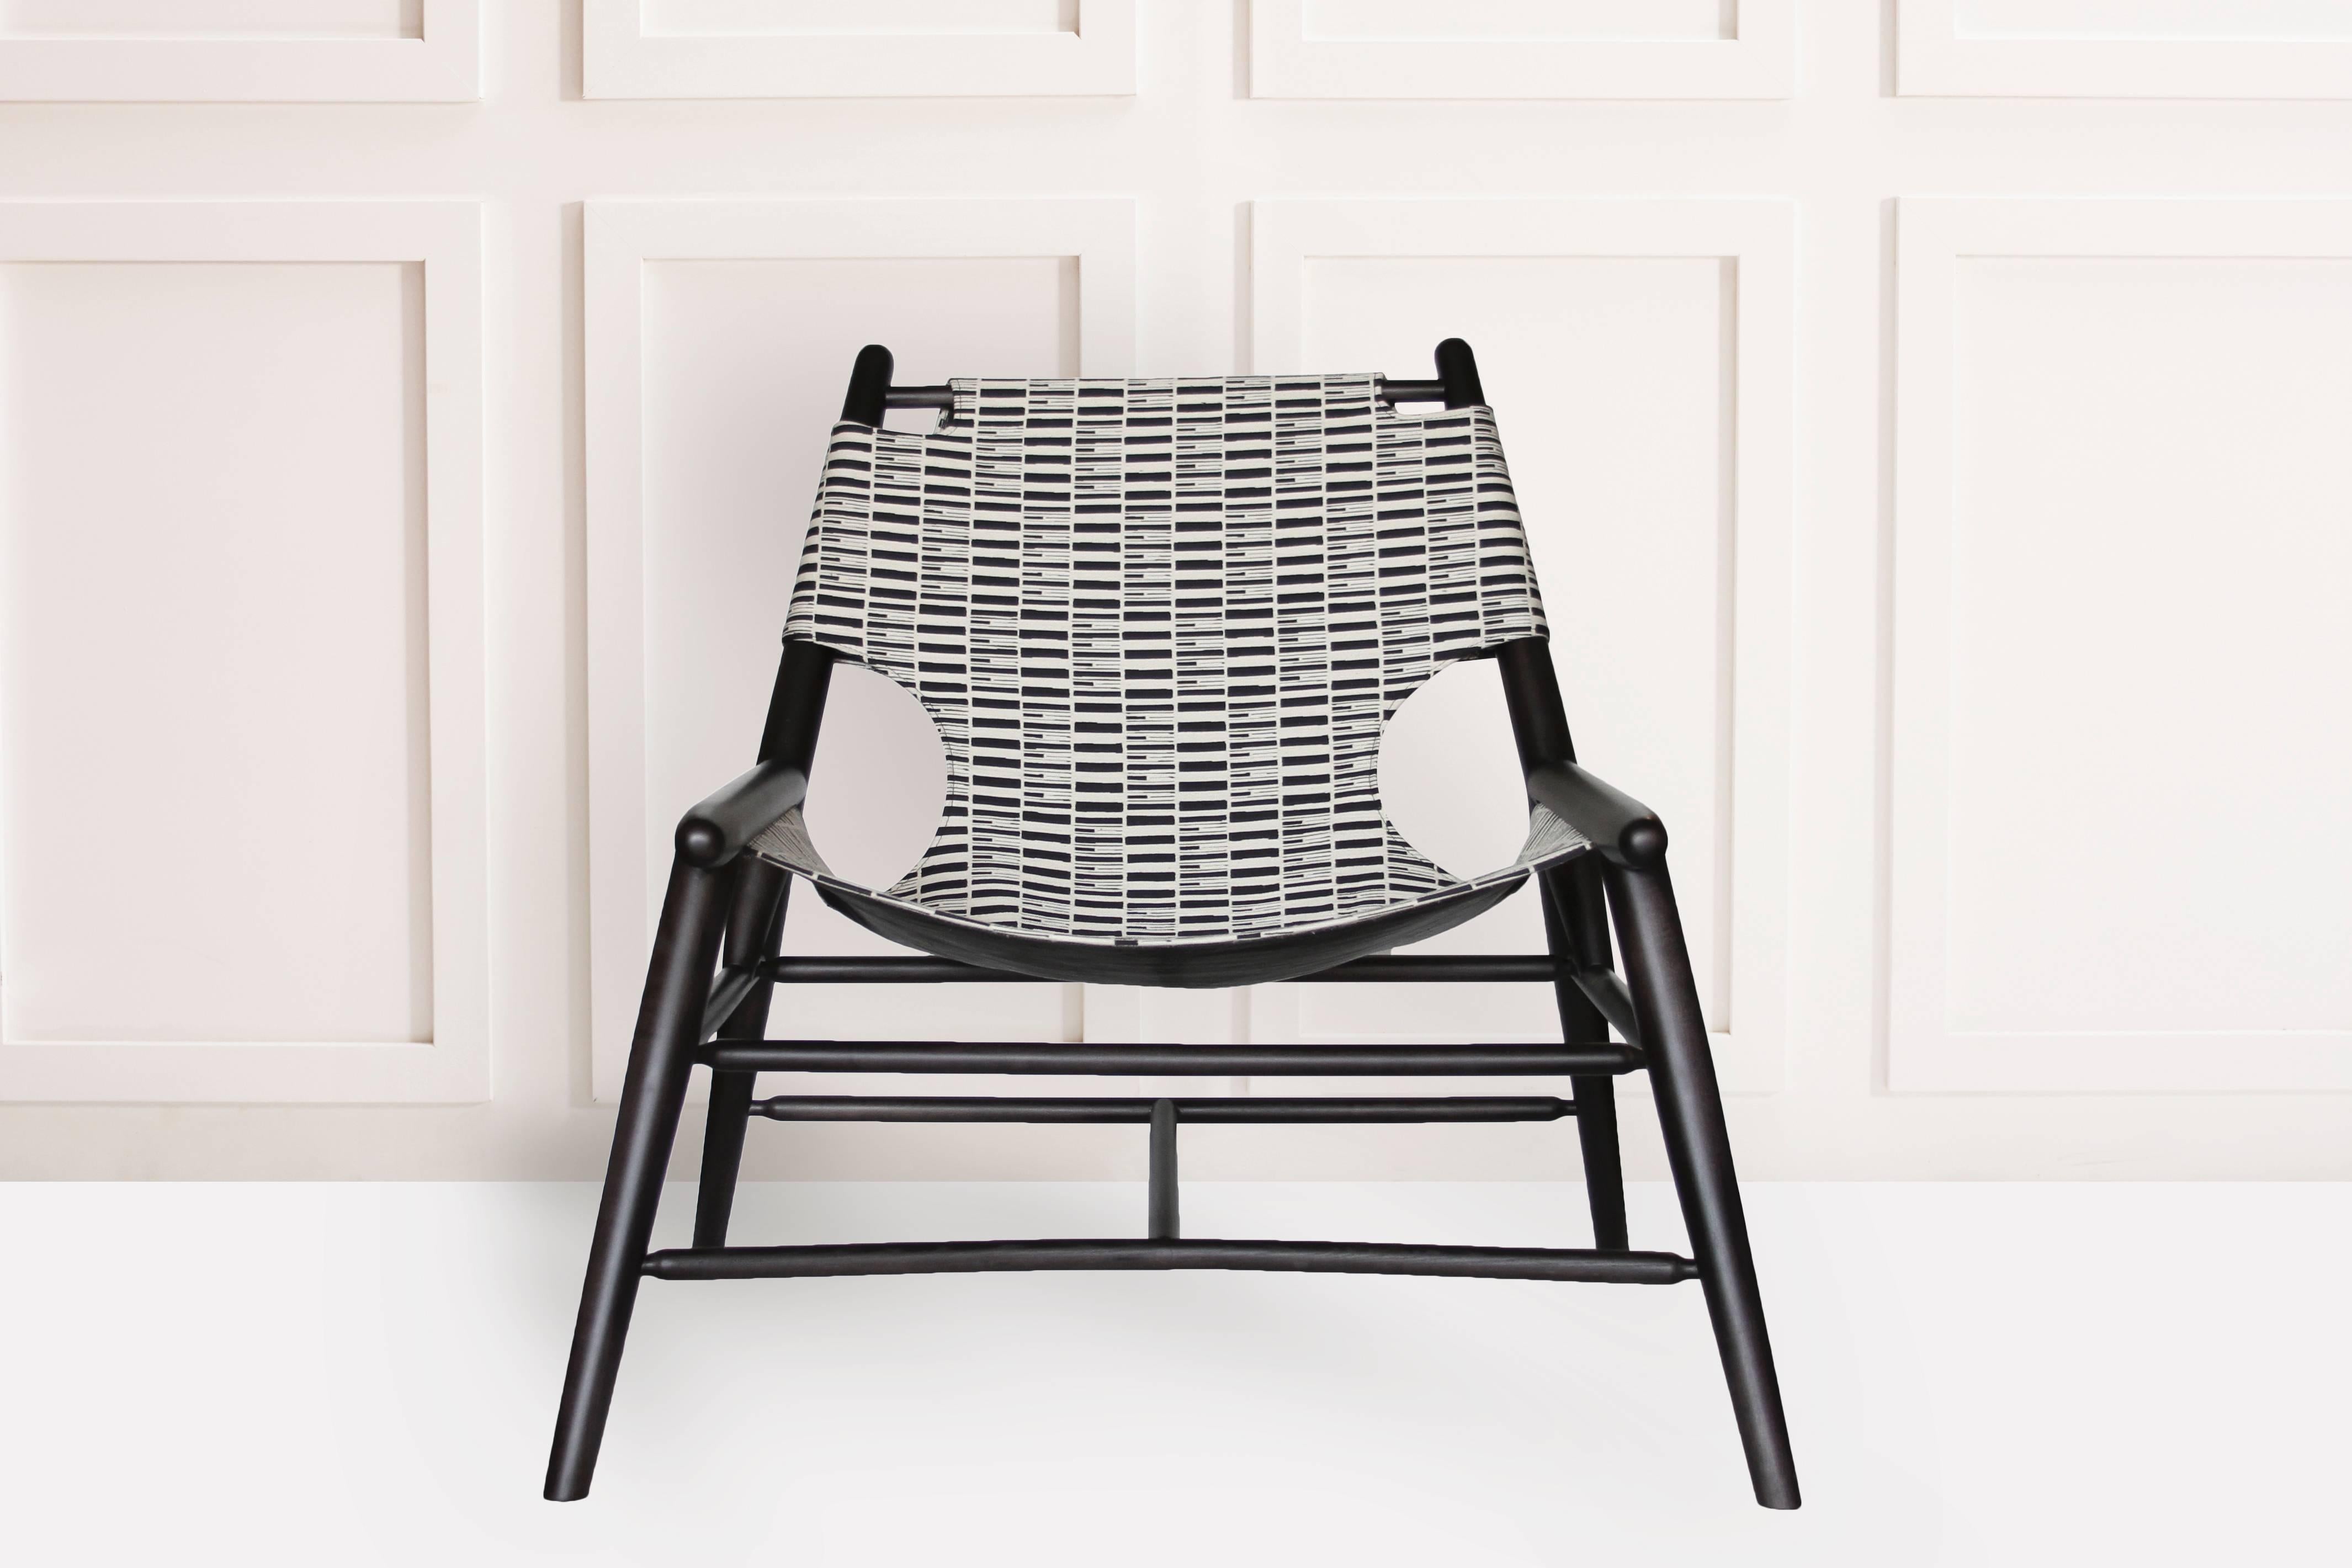 Made from maple and stained a rich black the sling chair may be upholstered in selections from an Anna Karlin-designed Japanese textile collection. The cotton/linen blend fabrics are hand made in Kyoto by master weavers Hosoo, a Japanese family